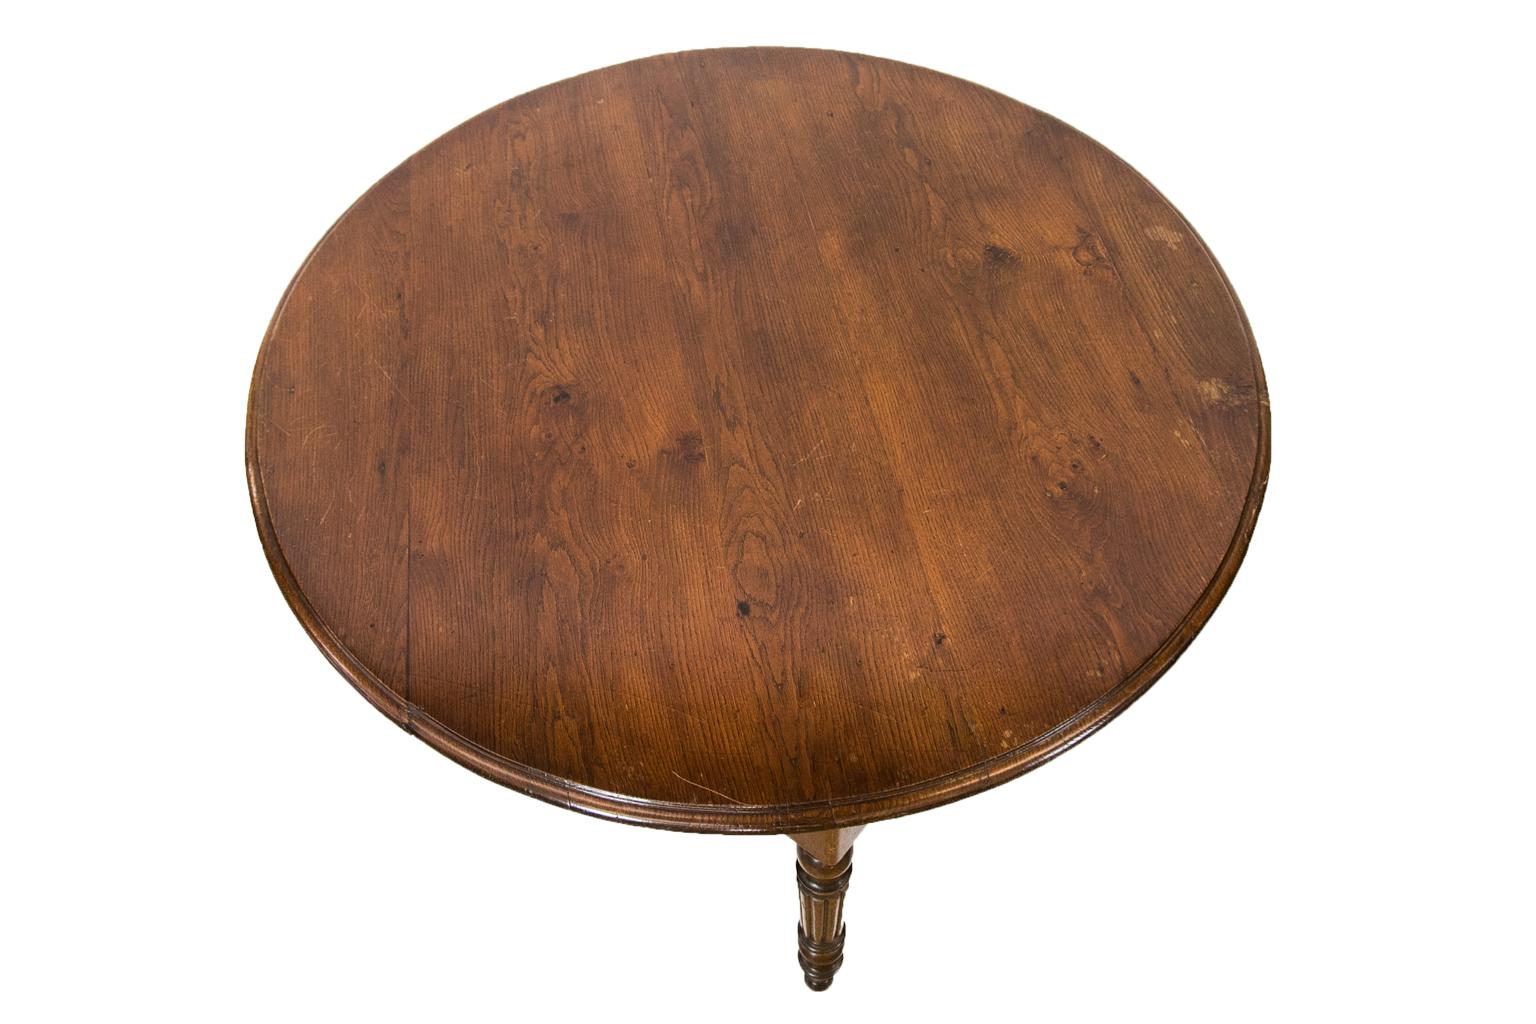 French oak round table has turned and reeded legs with exposed peg construction and a bull nosed molded top. There is one very long, deep drawer.